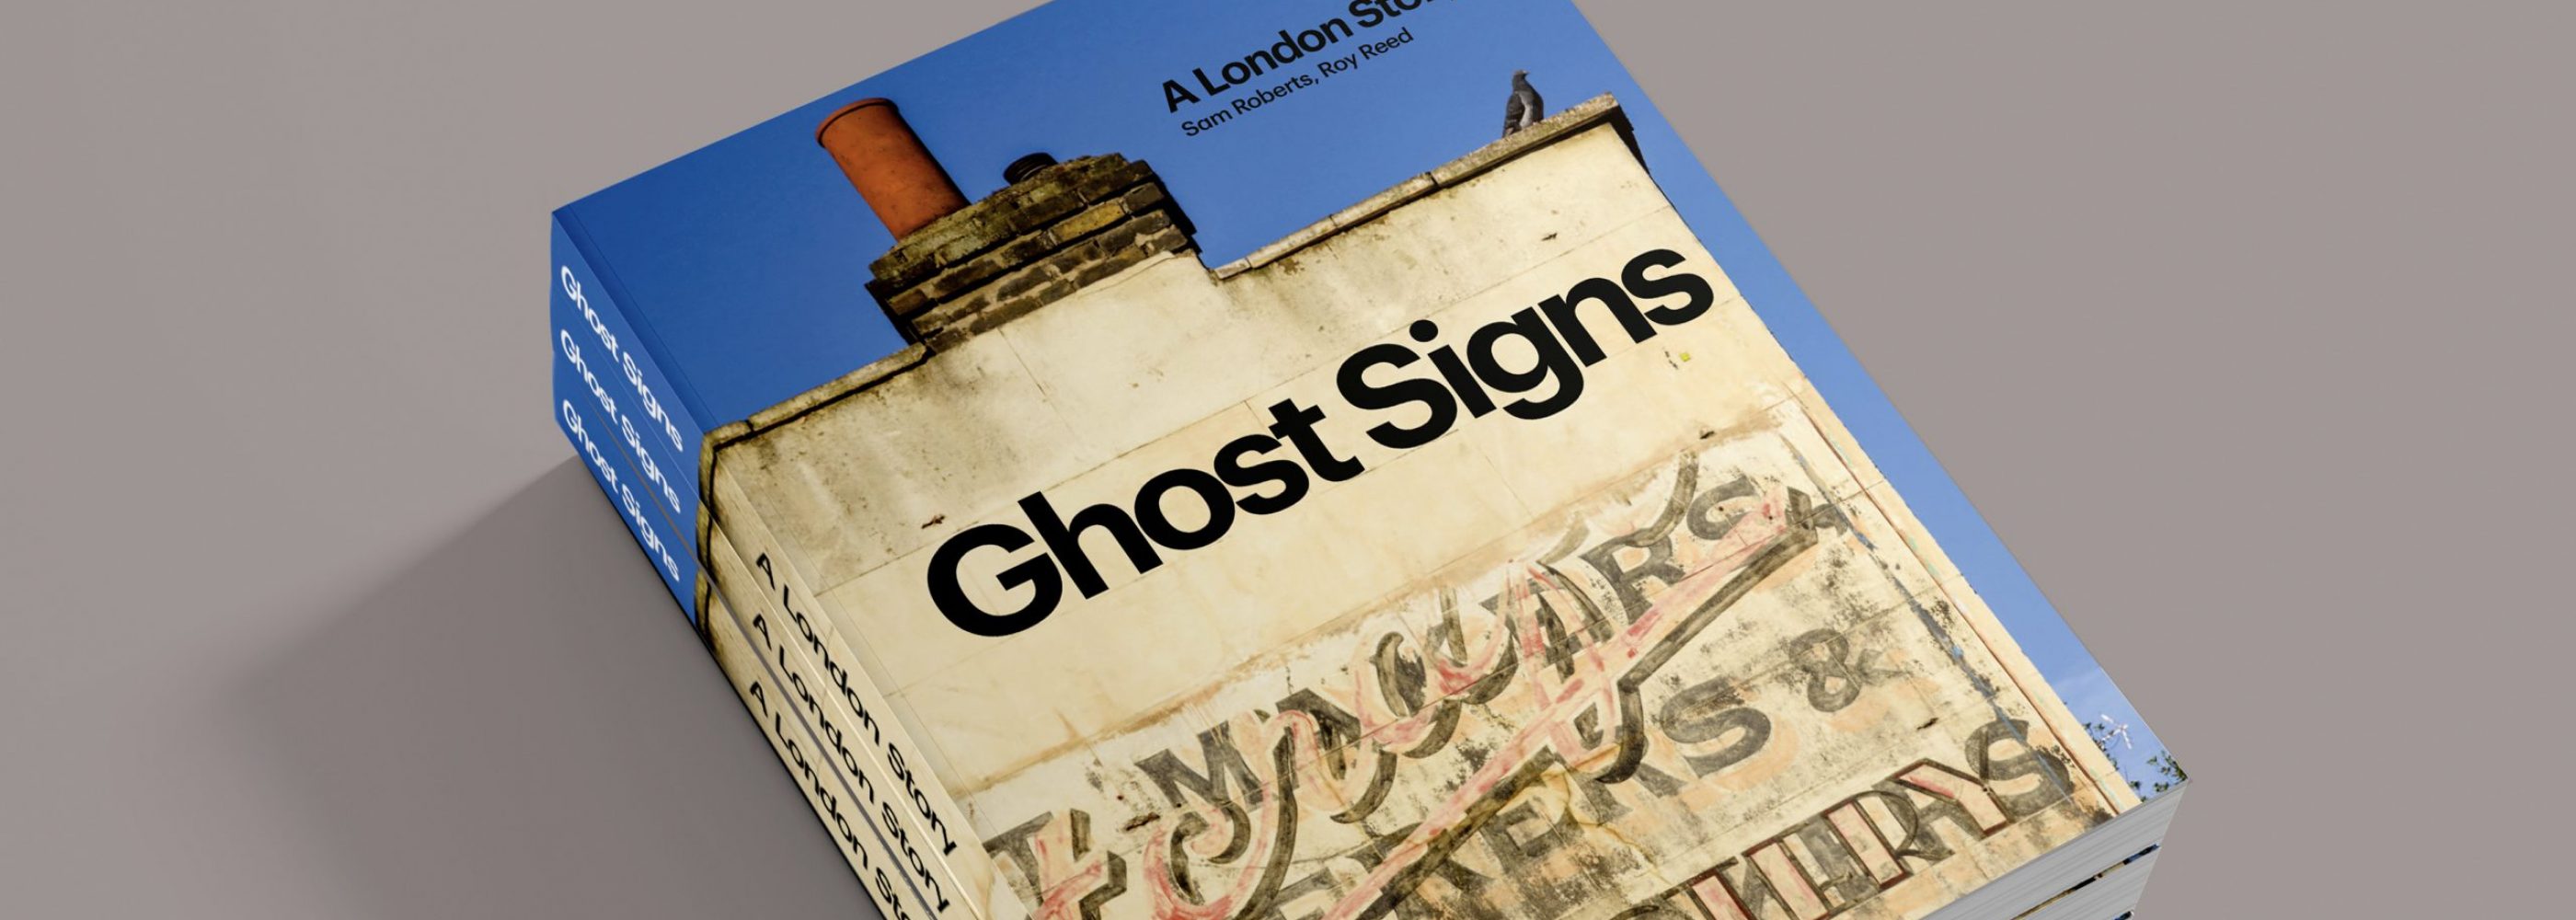 Ghost-Signs-A-London-Story-Cover-banner-1